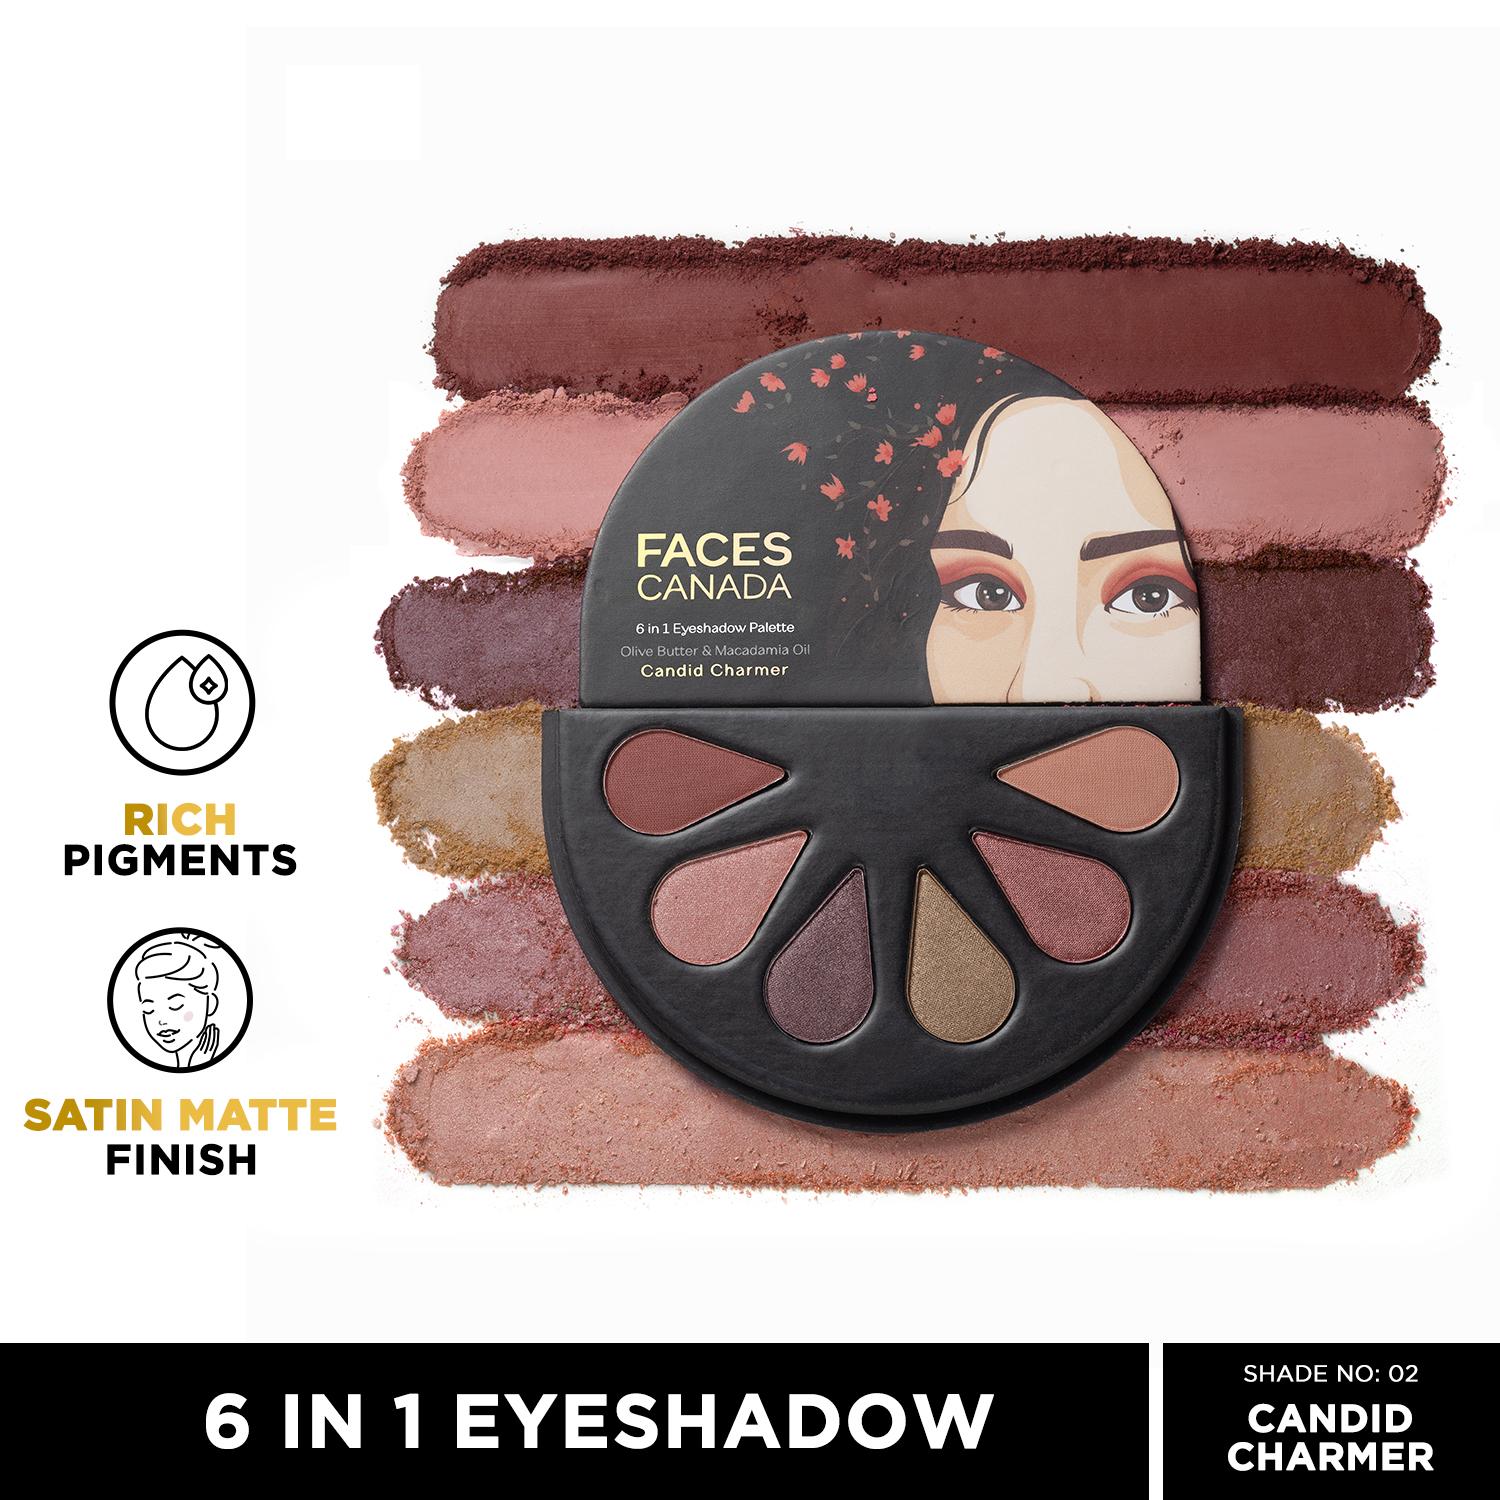 Faces Canada | Faces Canada 6 in 1 Eyeshadow Palette - Candid Charmer 02, Olive Butter & Macadamia Oil (6 g)